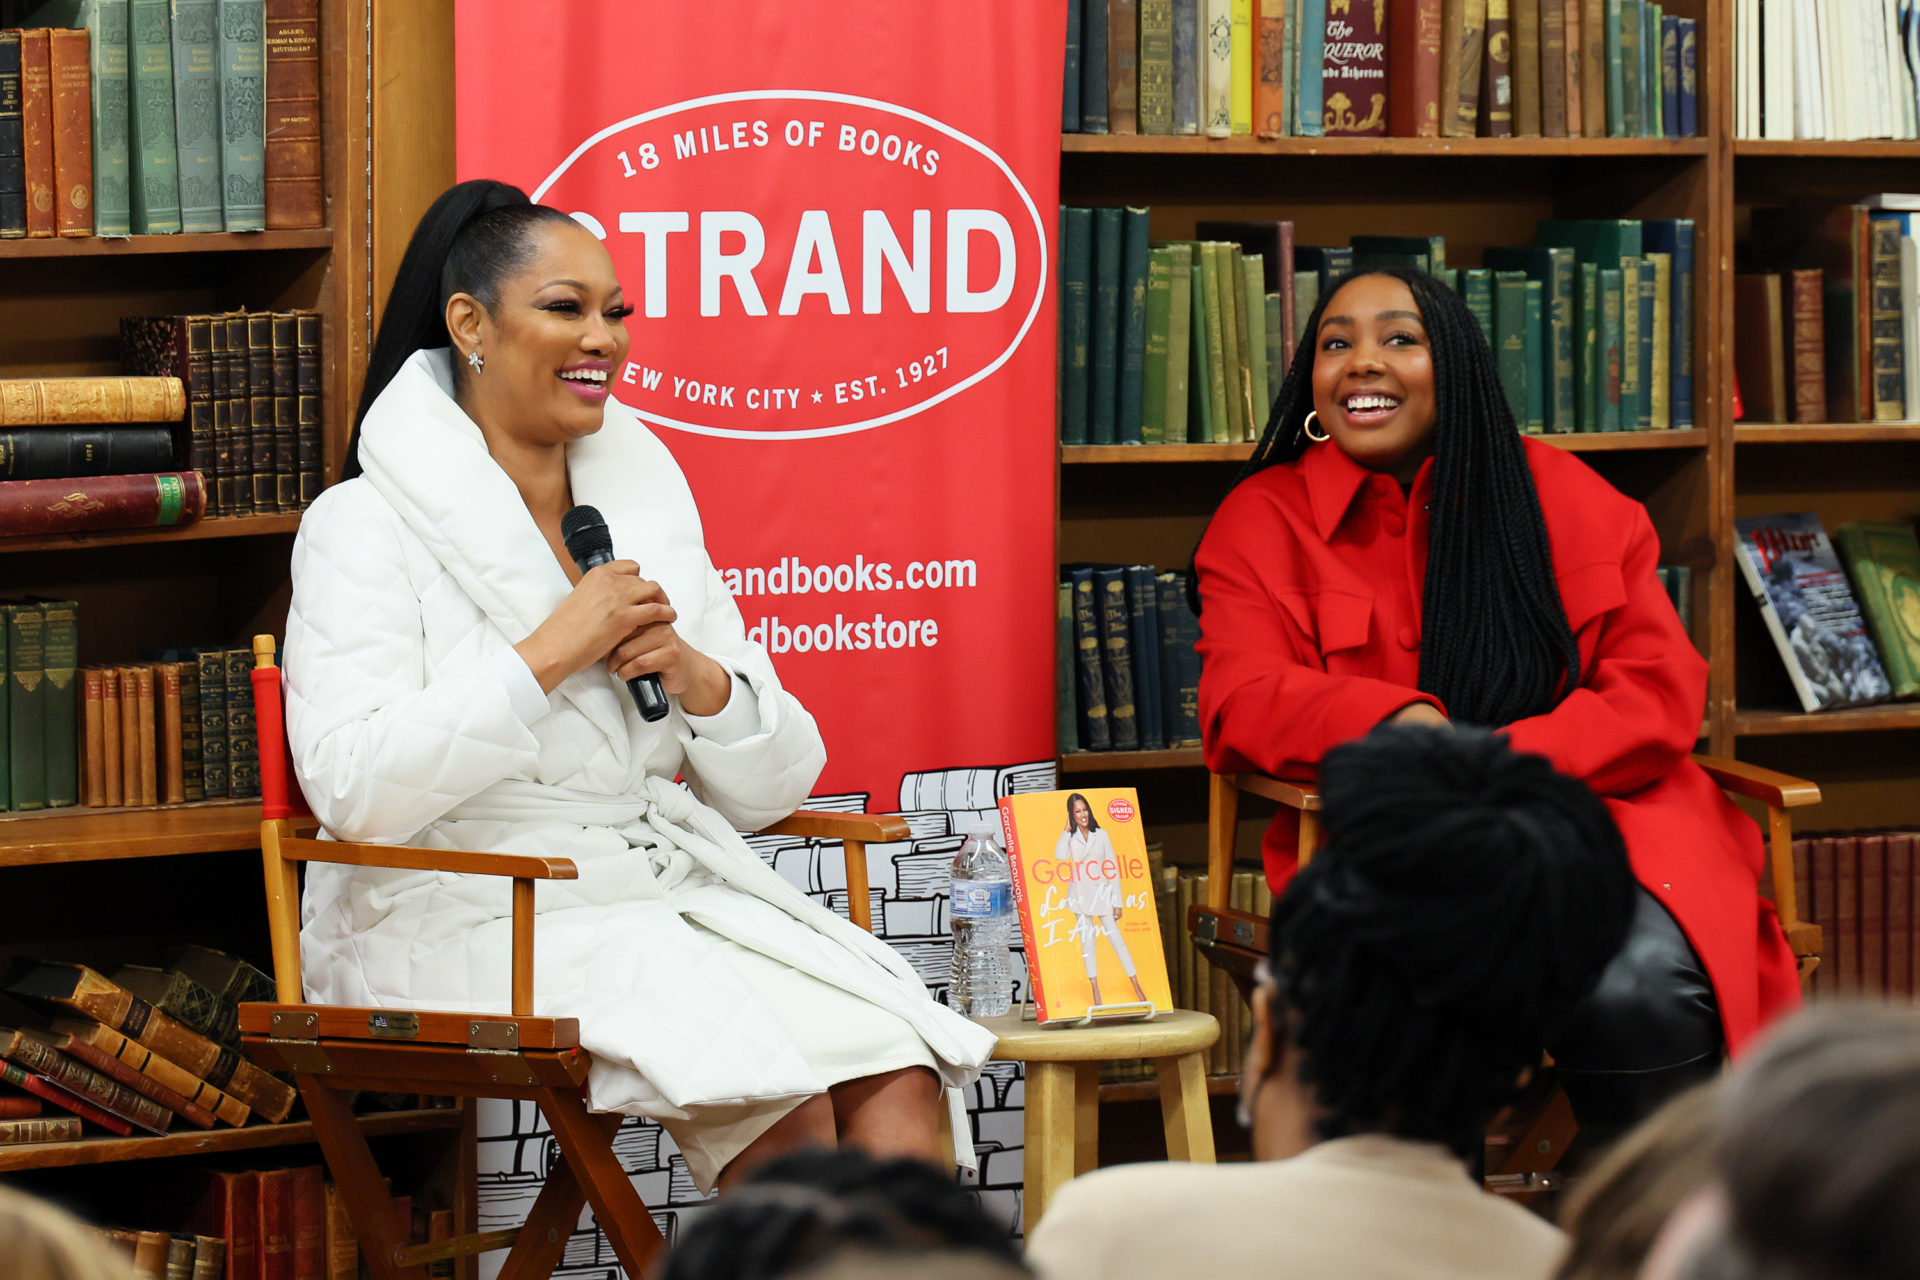 Garcelle Beauvais Discusses Her New Book "Love Me As I Am" With Lindsay Peoples